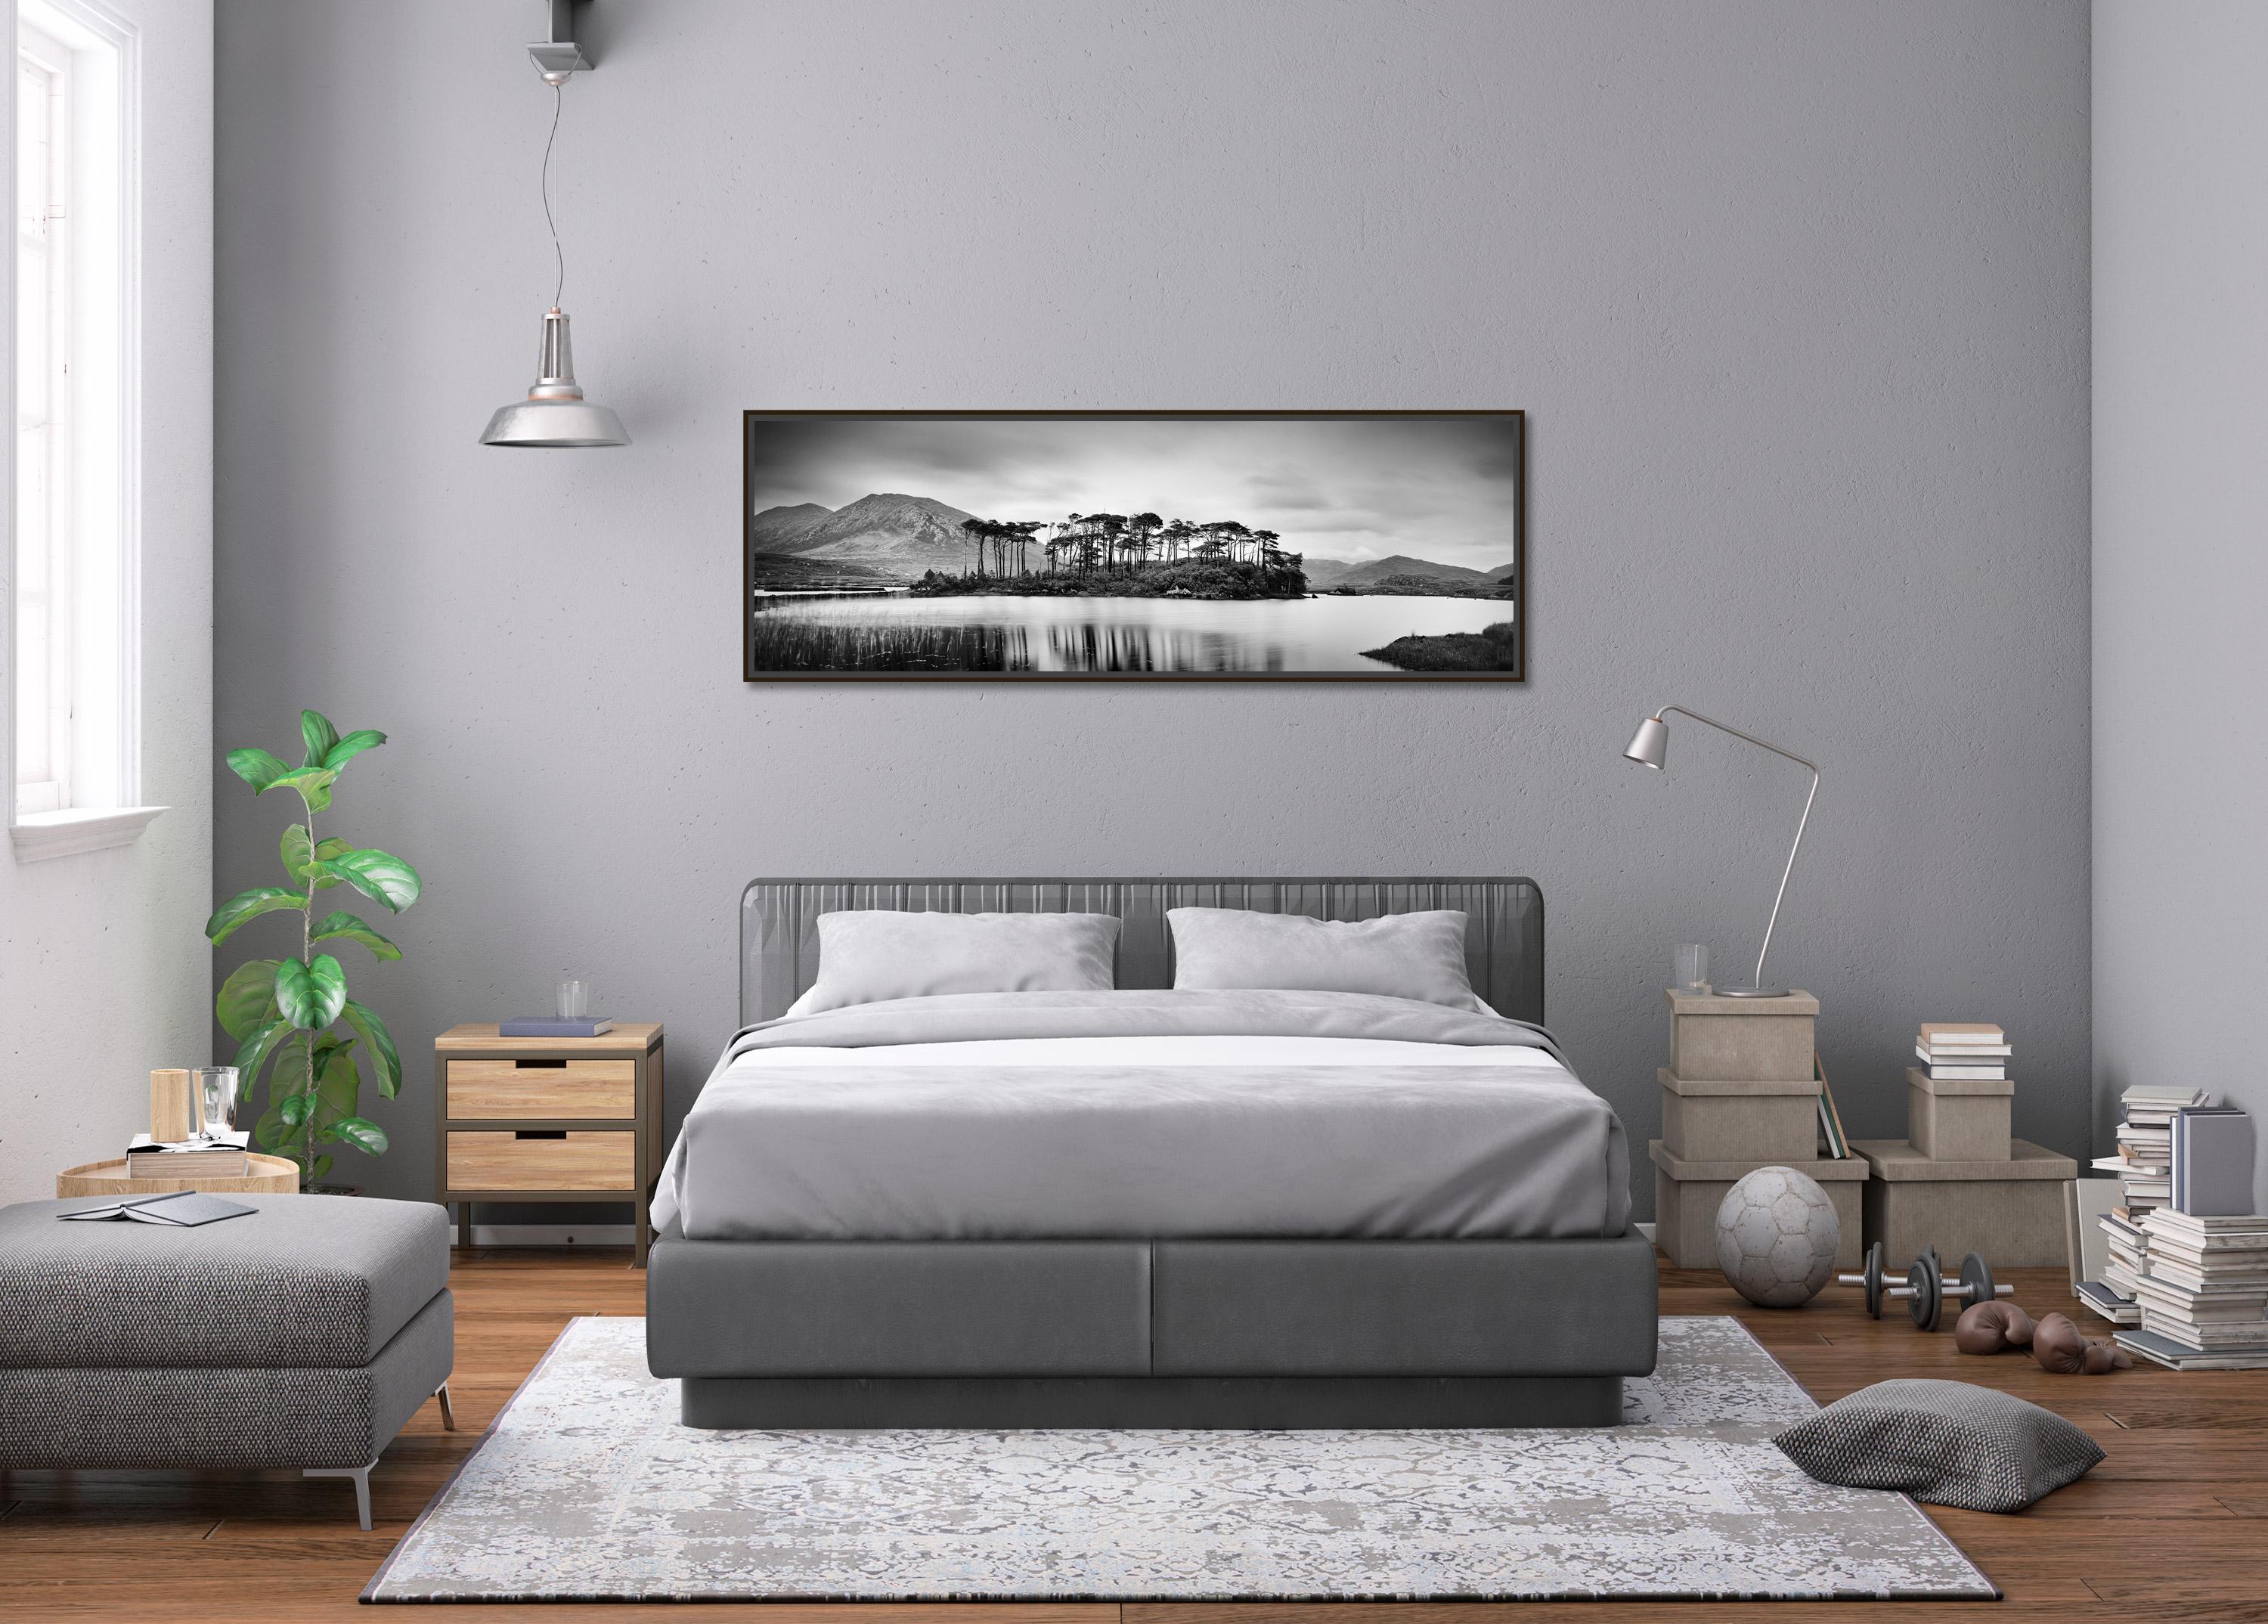 Tree Island Panorama, contemporary black and white art waterscape photo print - Contemporary Photograph by Gerald Berghammer